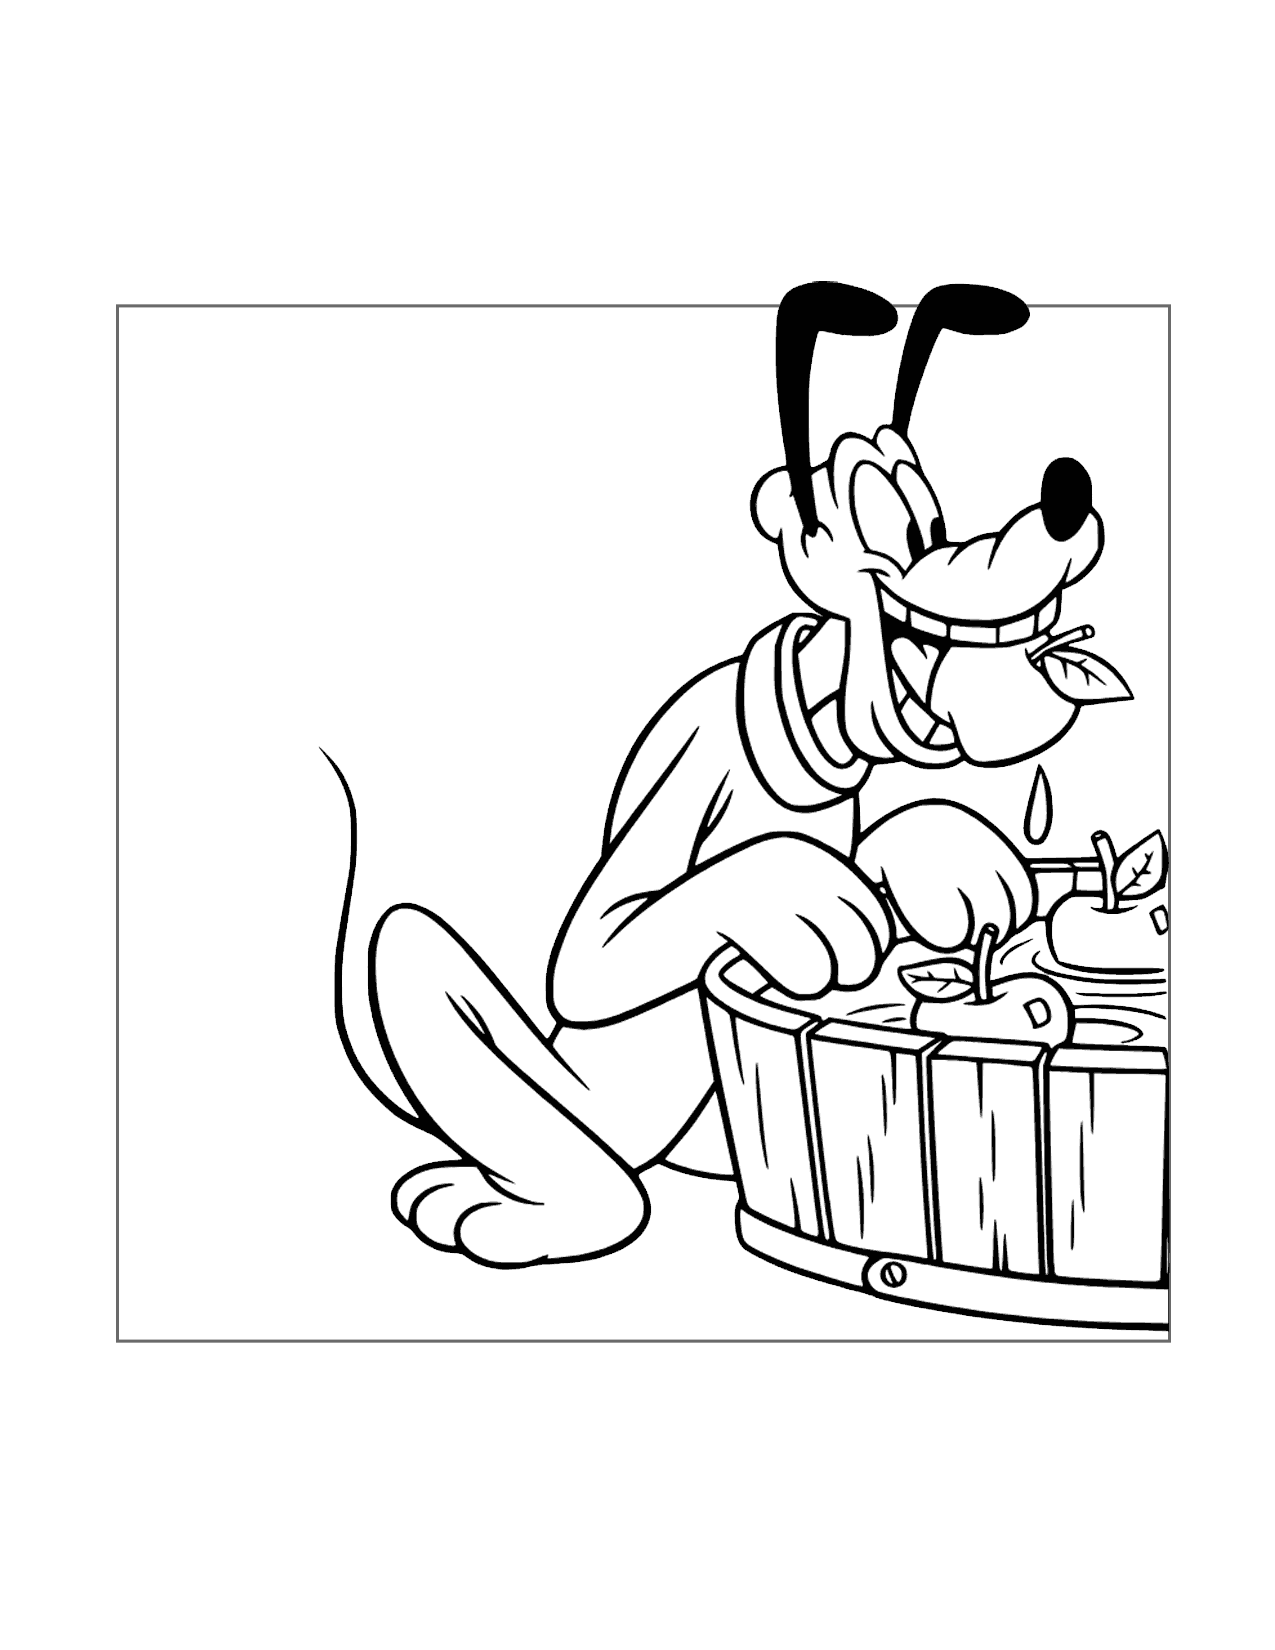 Pluto Likes Apples Coloring Page